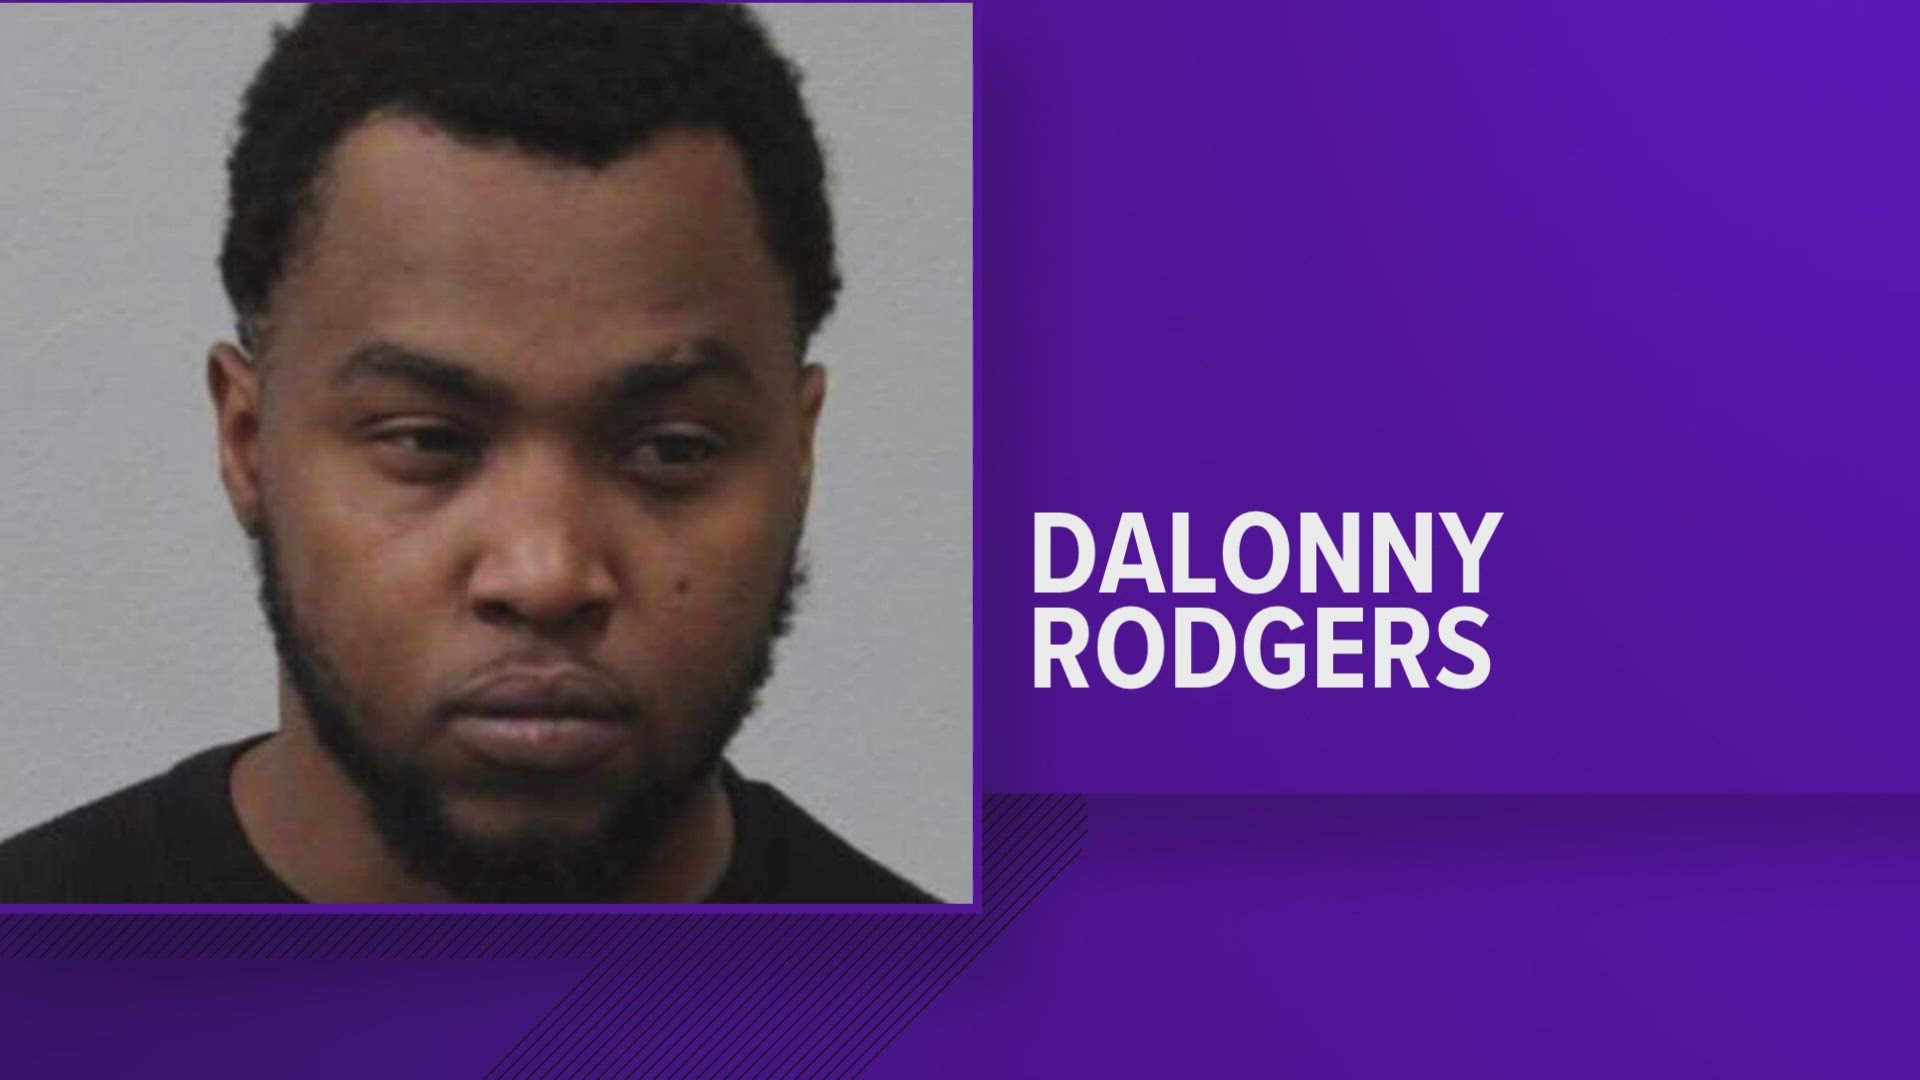 Police in Massachusetts arrested Dalonny Rodgers during a stolen car investigation. He's accused of killing two men and trying to kill two others in Plainfield.